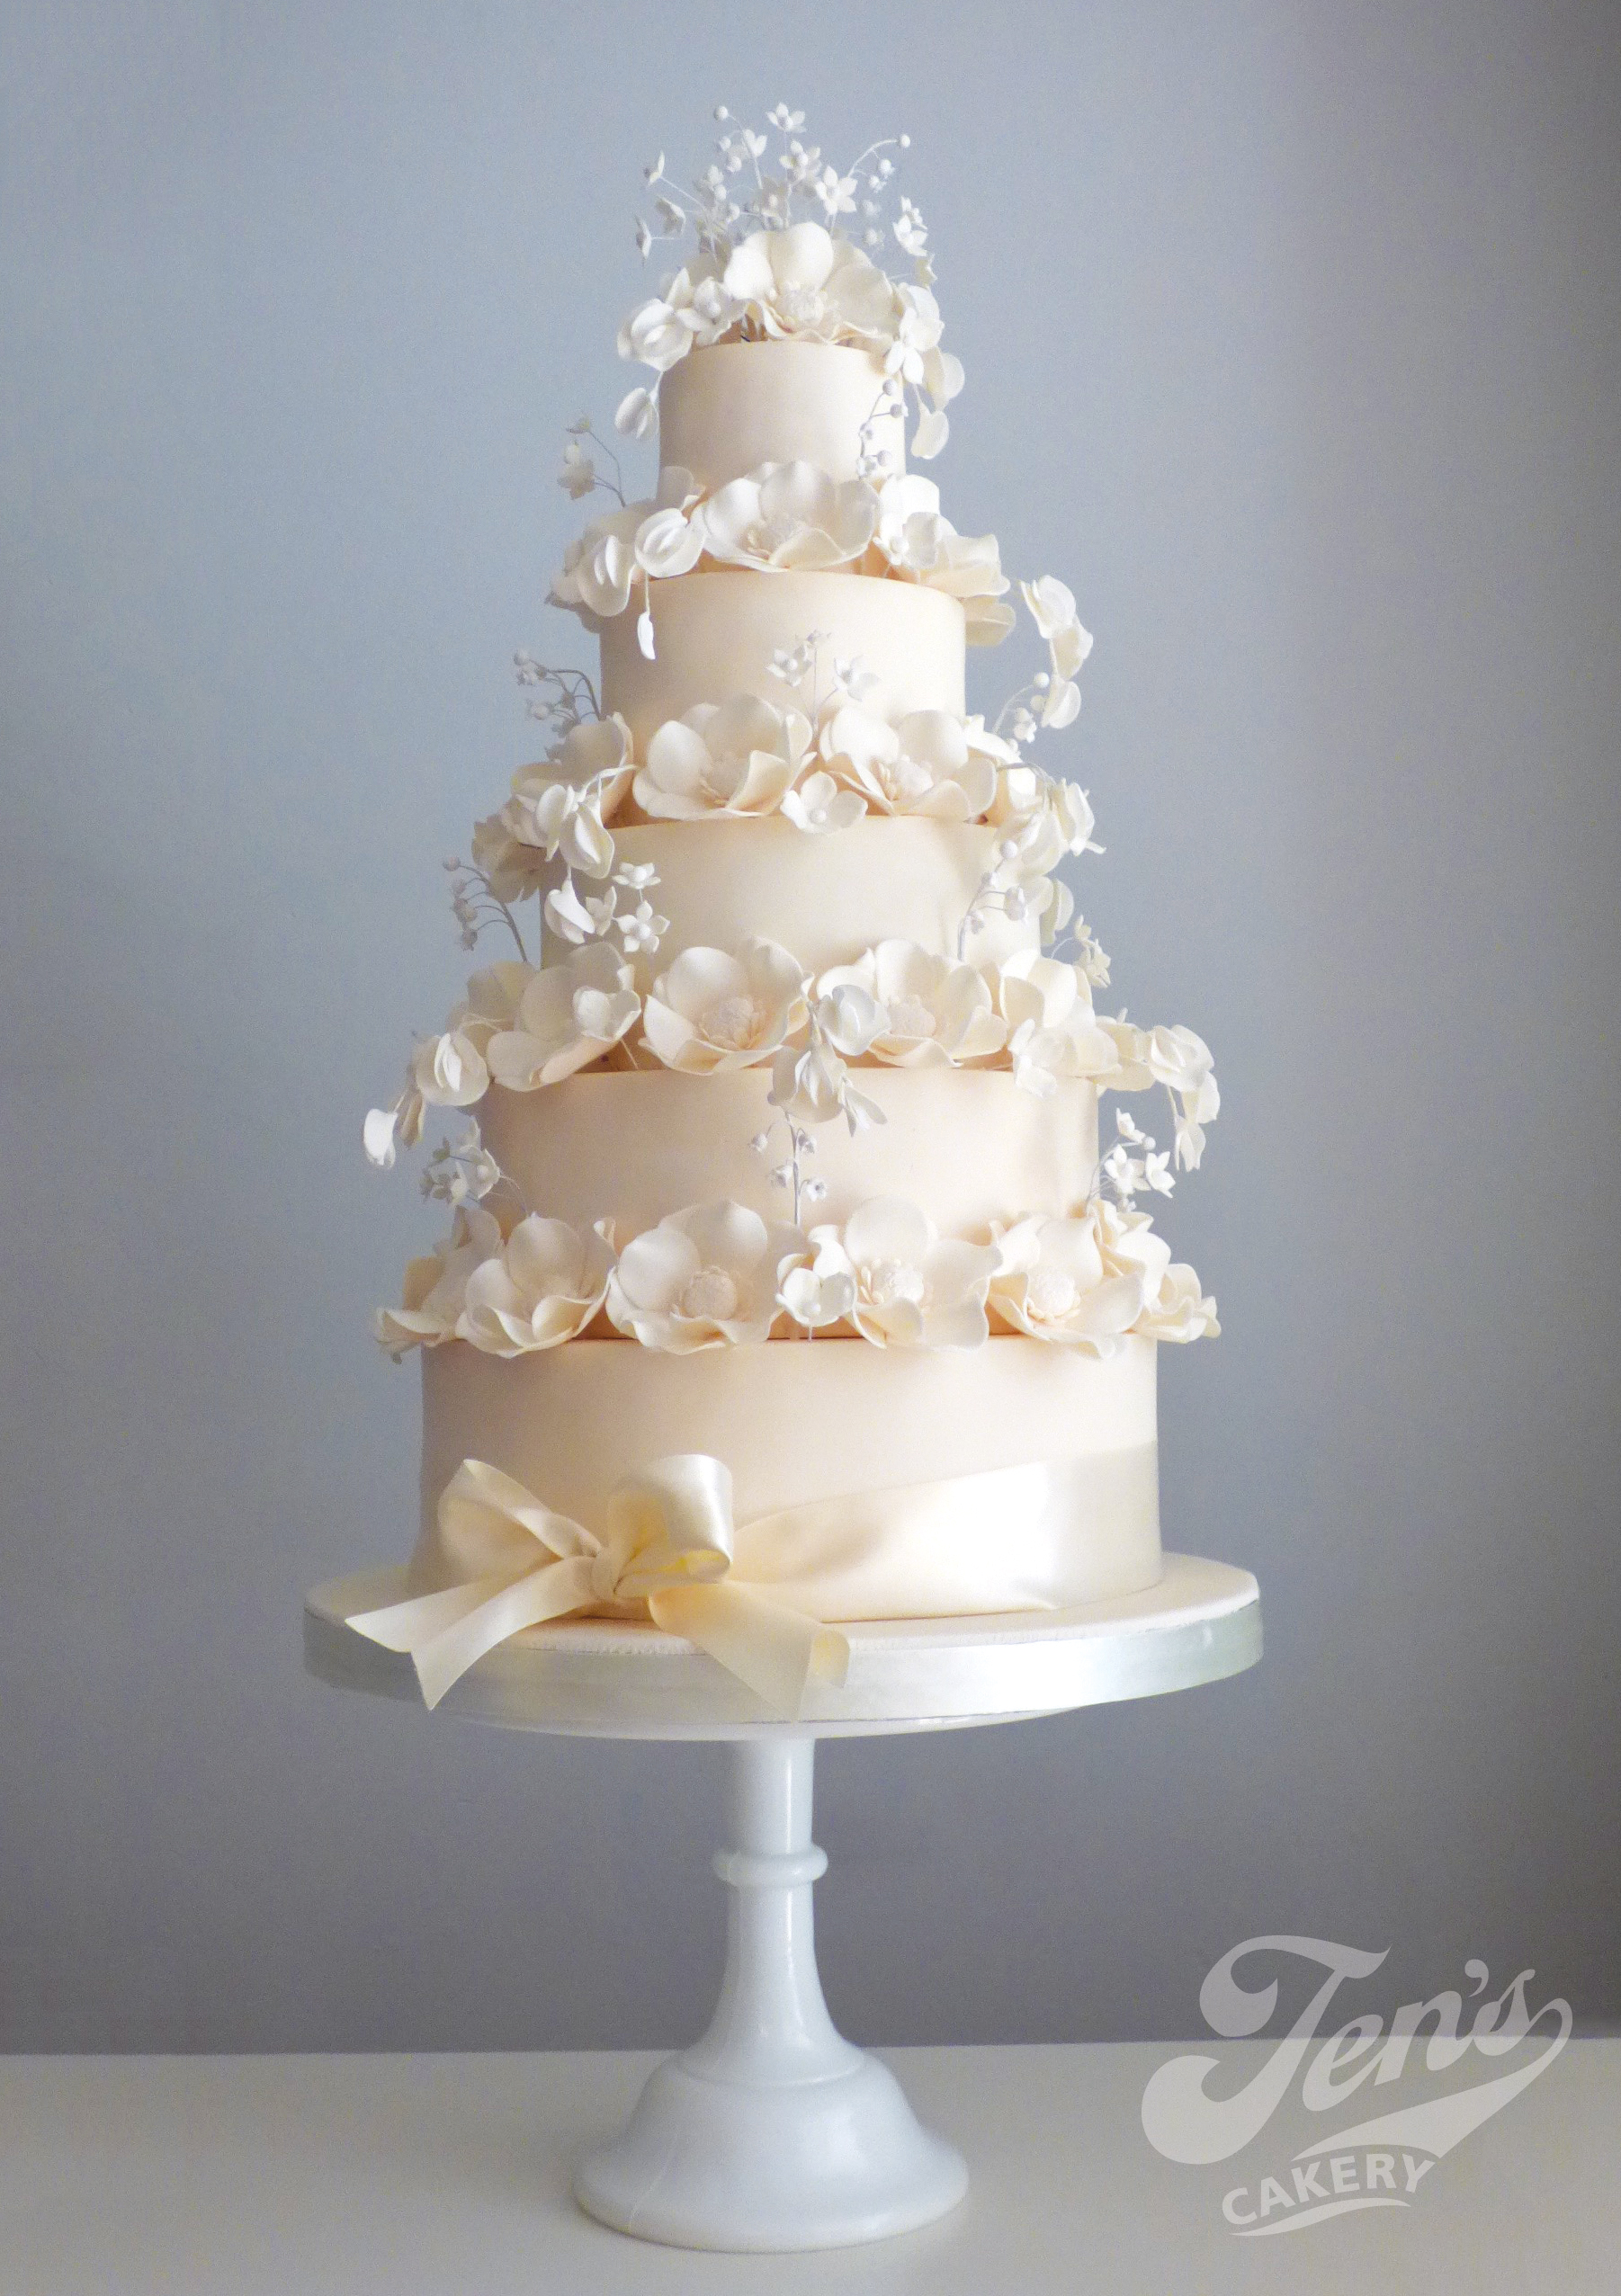 Asian Wedding Cakes – Unique Wedding Cakes from London